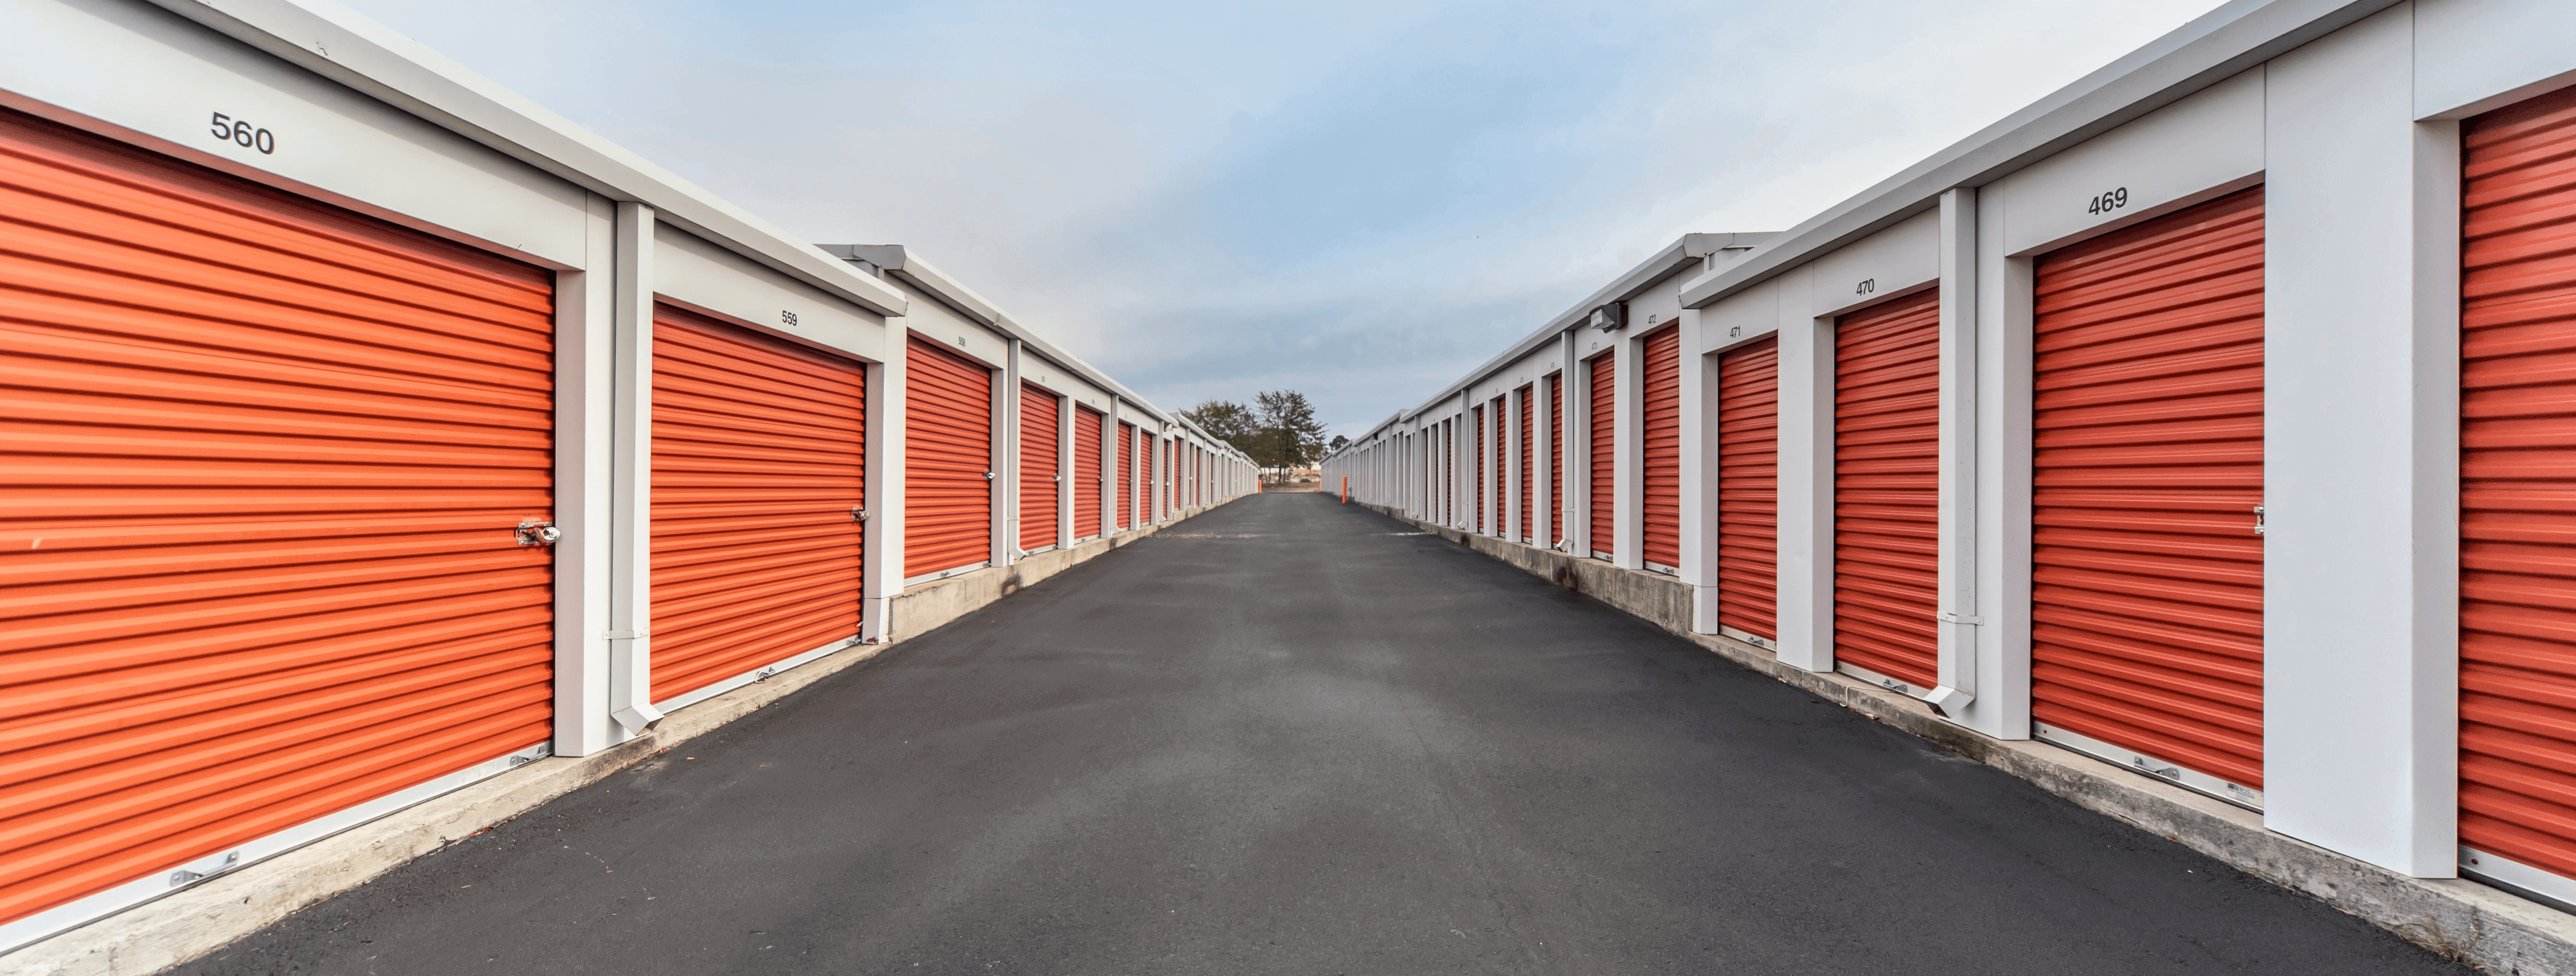 An outdoor shot of a row of self storage units with orange doors.